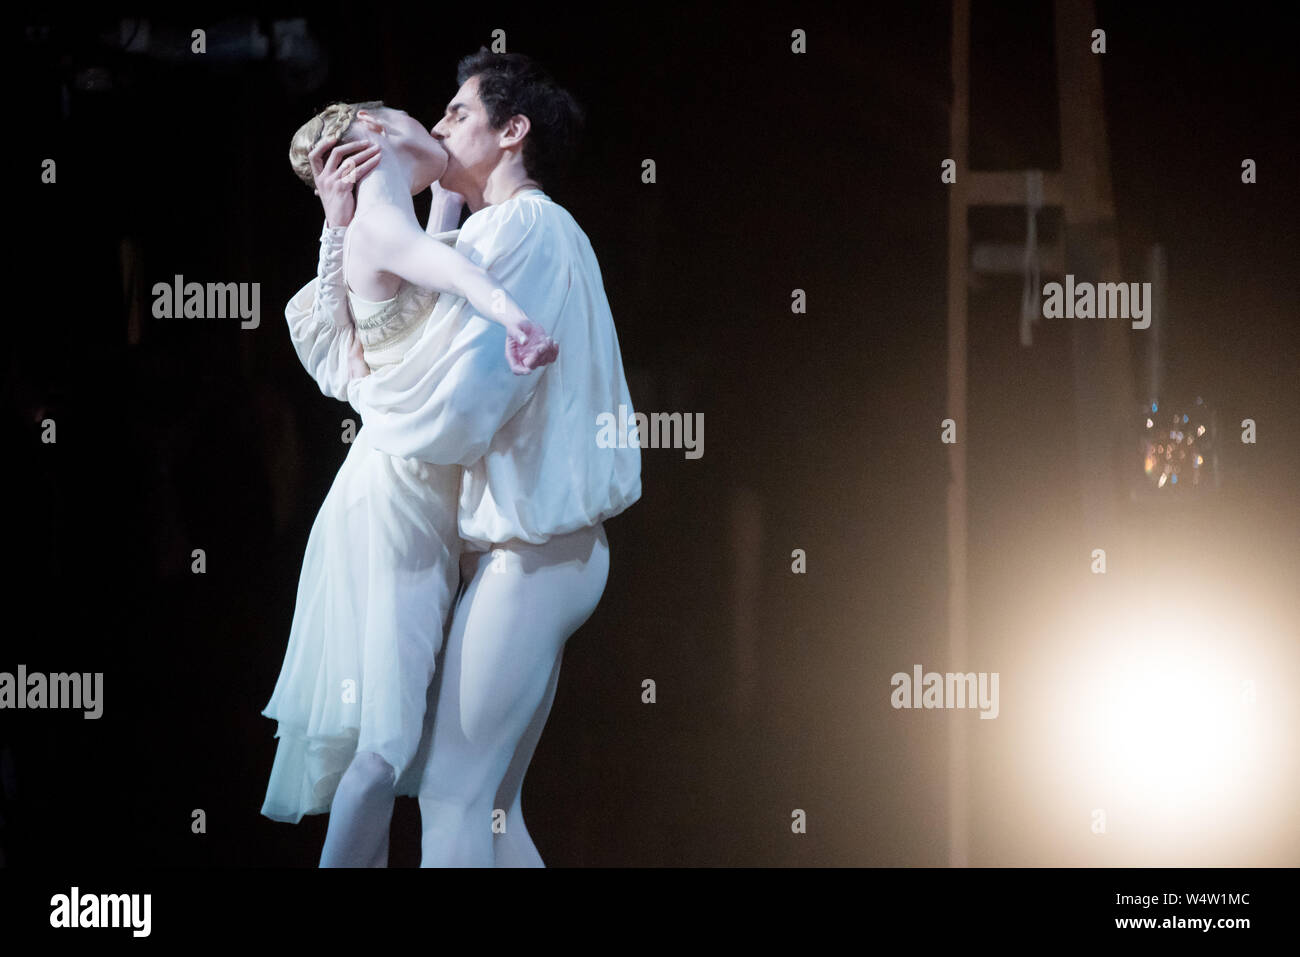 Passionate kiss of Romeo and Juliet. Danced by ballerina Sarah Lamb with Federico Bonelli. Stock Photo